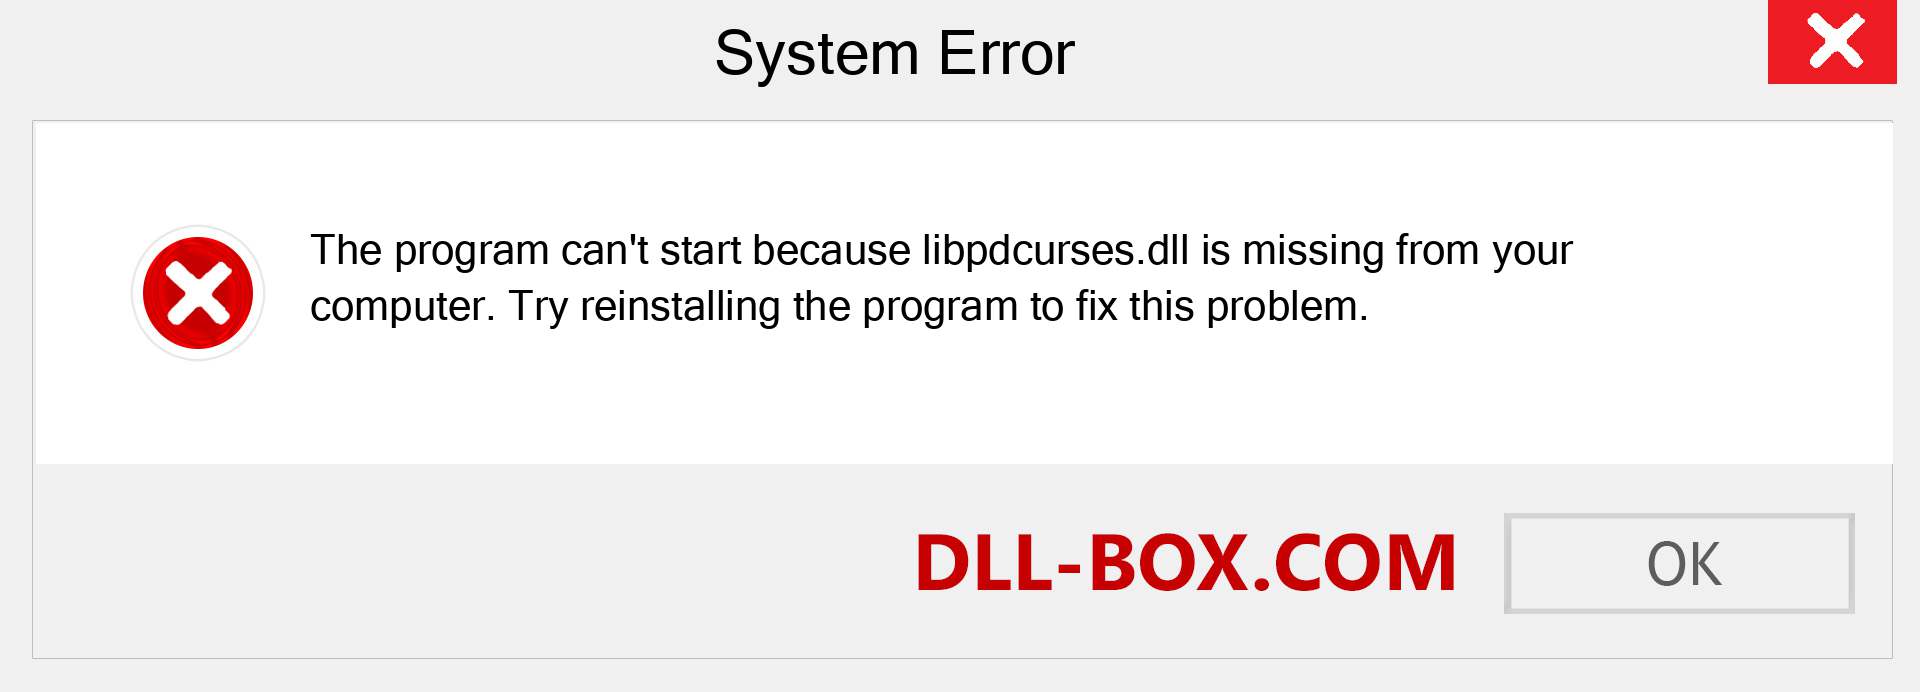  libpdcurses.dll file is missing?. Download for Windows 7, 8, 10 - Fix  libpdcurses dll Missing Error on Windows, photos, images